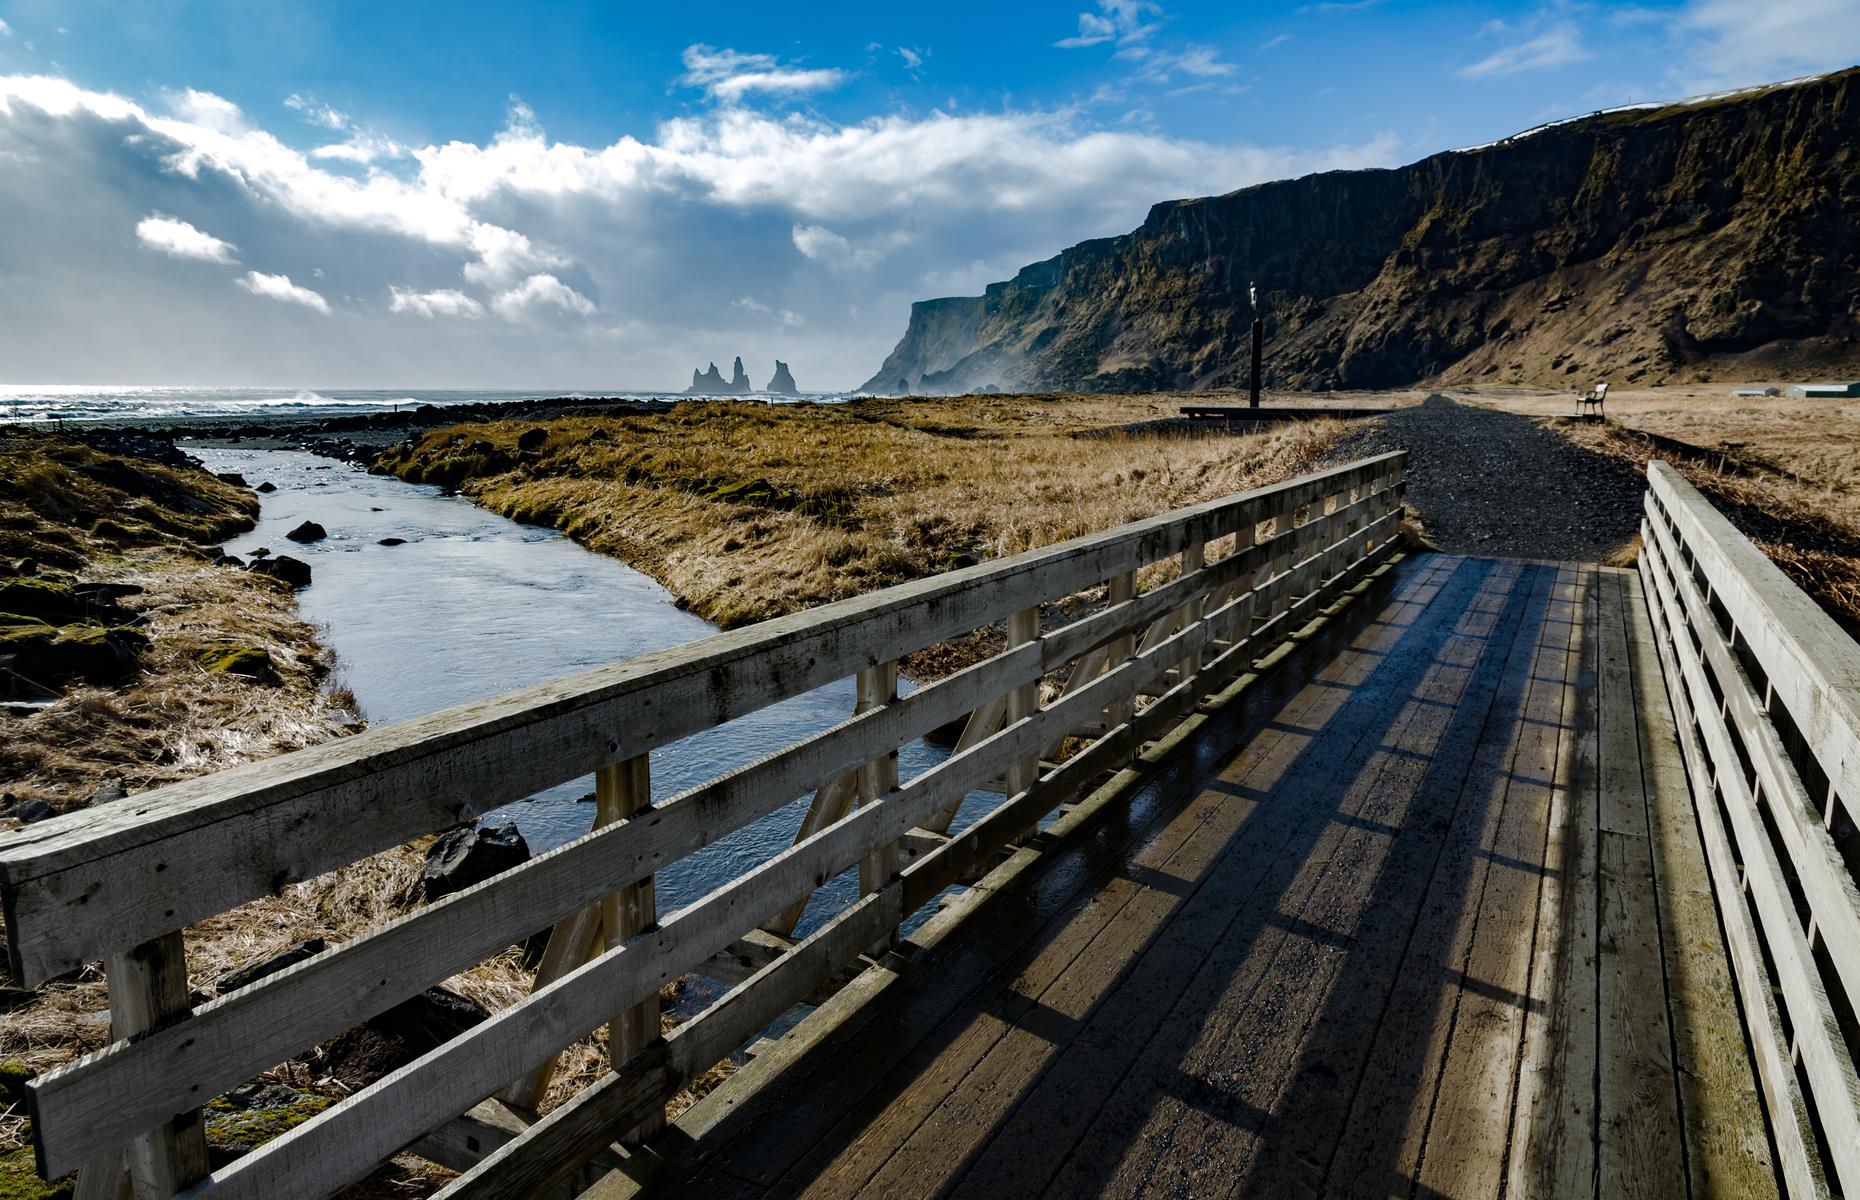 Walk to the top of Reynisfjall (pictured), the largest cliff to the east of the village, and you’ll get impressive views of Reynisdrangar, basalt sea stacks shooting out of the sea just off the coast. Look northwards and you’ll be treated to a view of the impressive Mýrdalsjökull glacier.